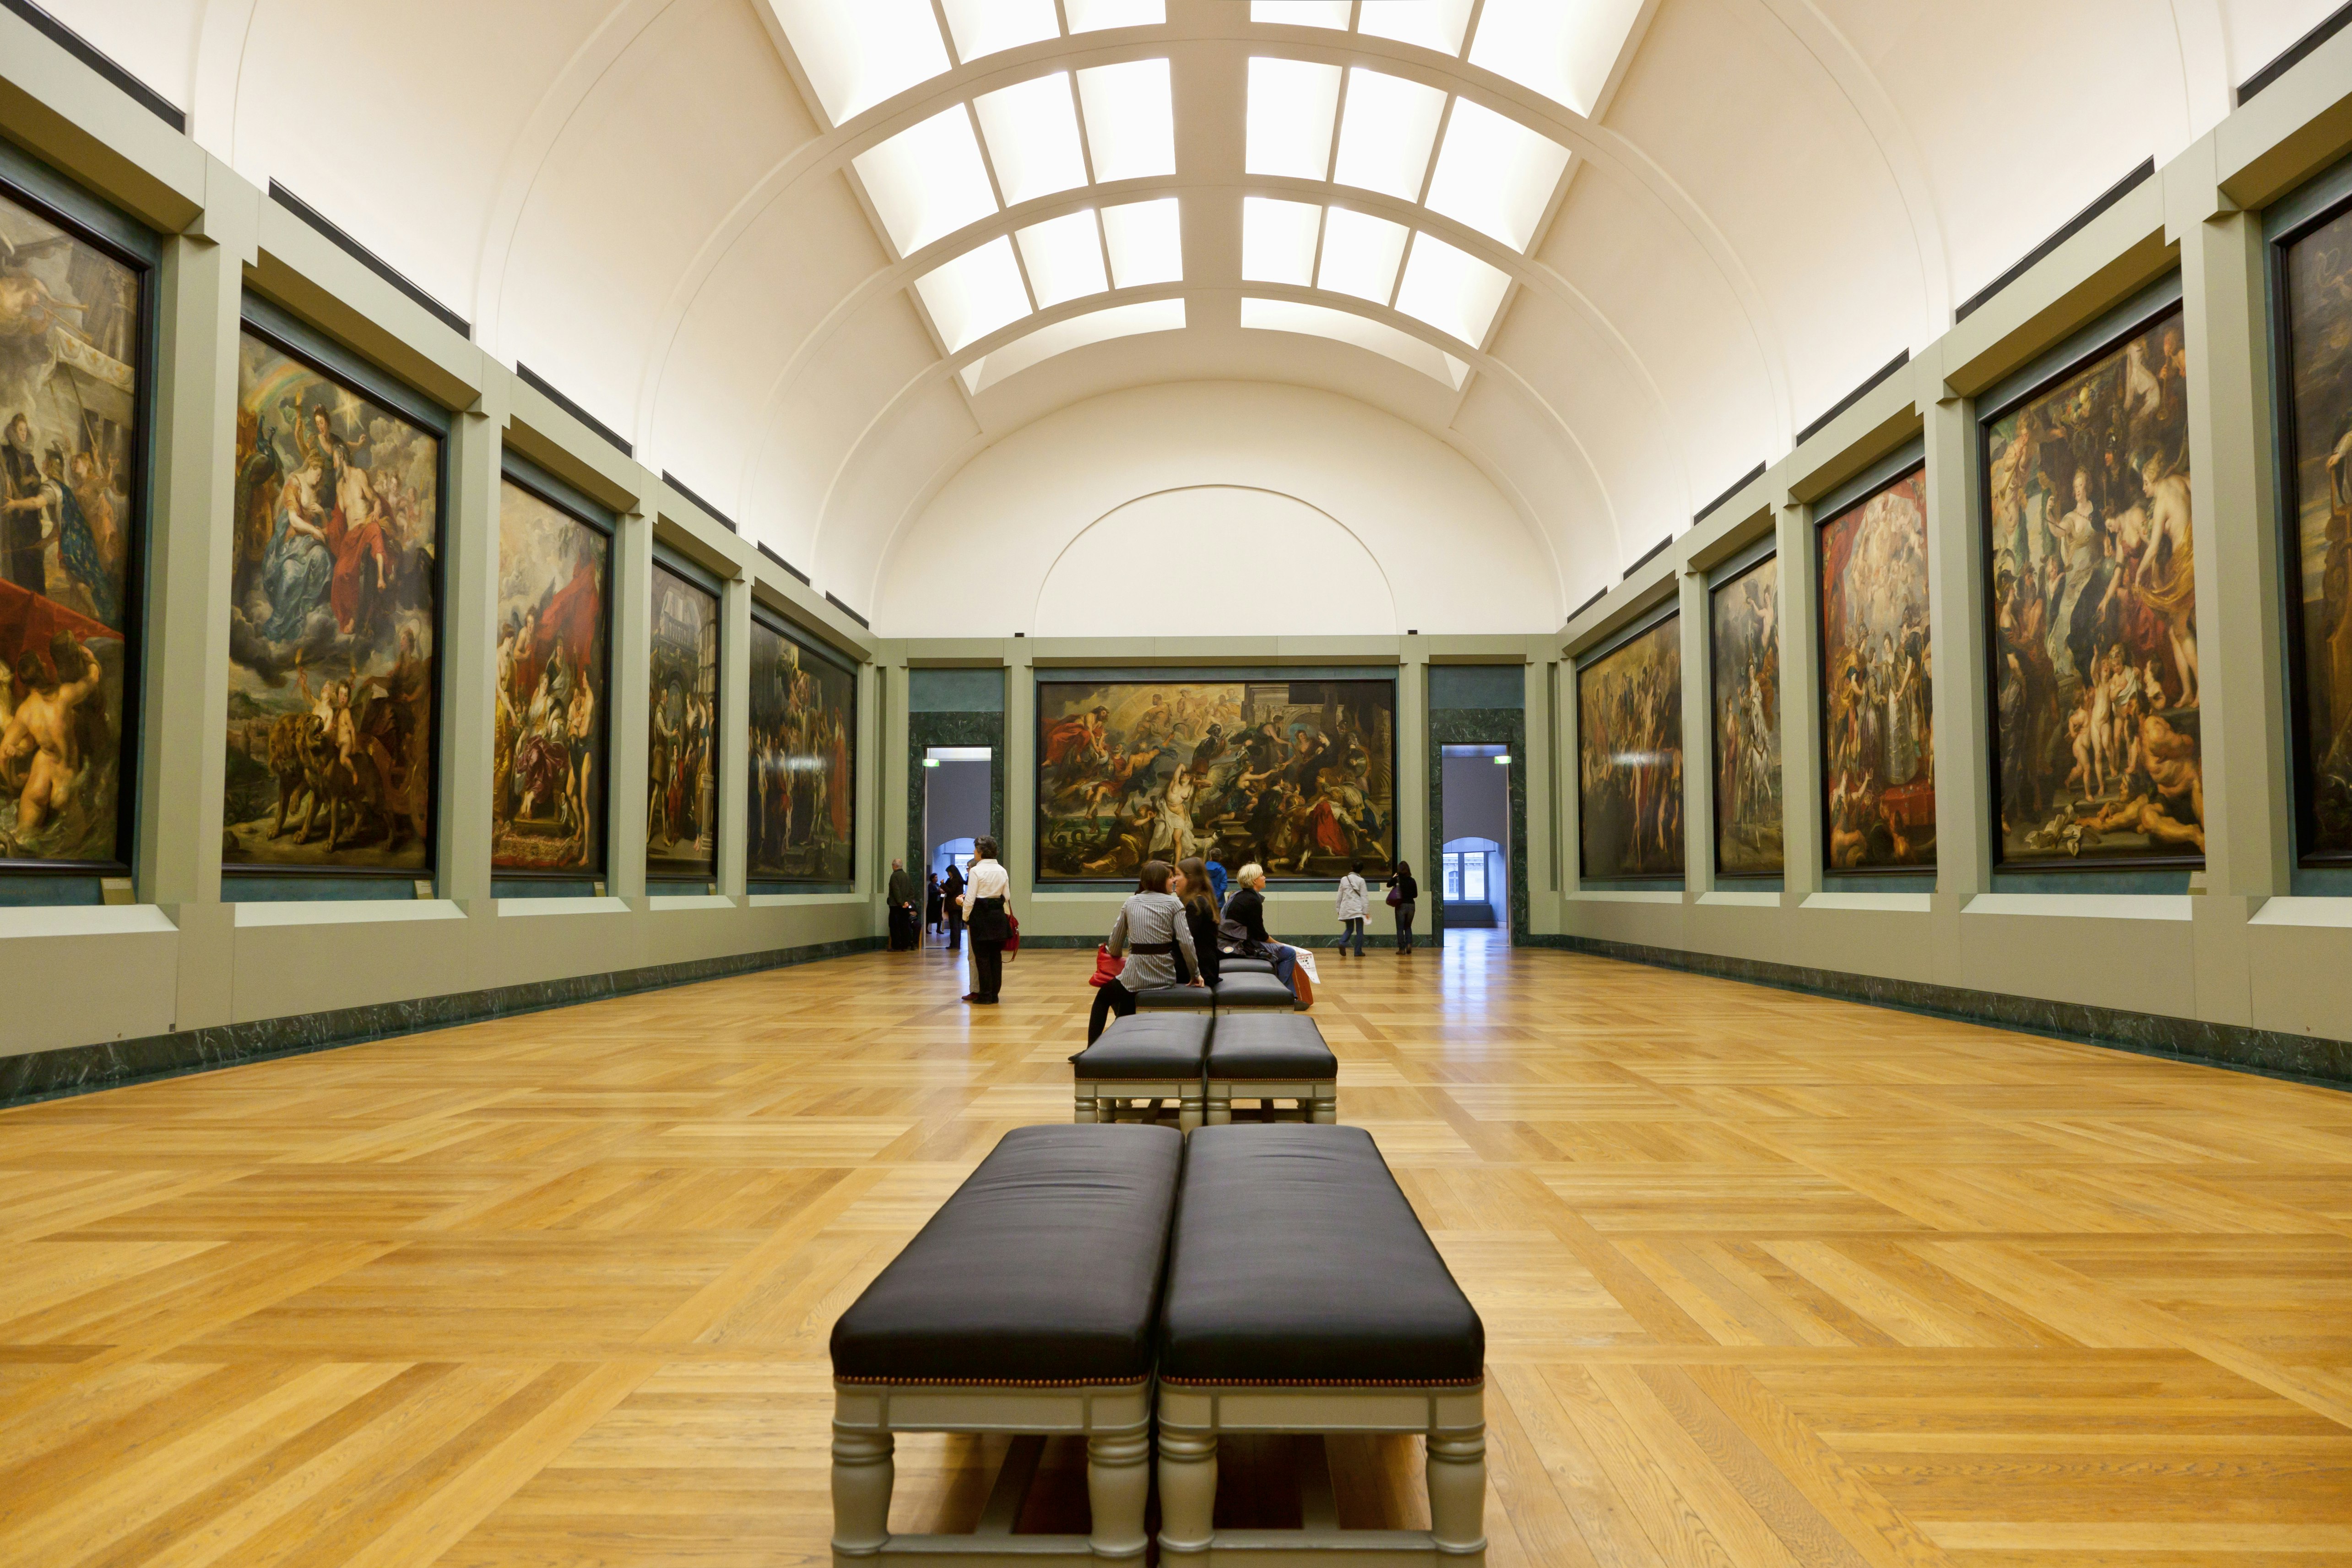 A view of the Galerie Médicis: a wood-floored gallery with a series of wooden benches running down the centre of the room. Large paintings hang on the walls and skylights are installed in the ceiling above.